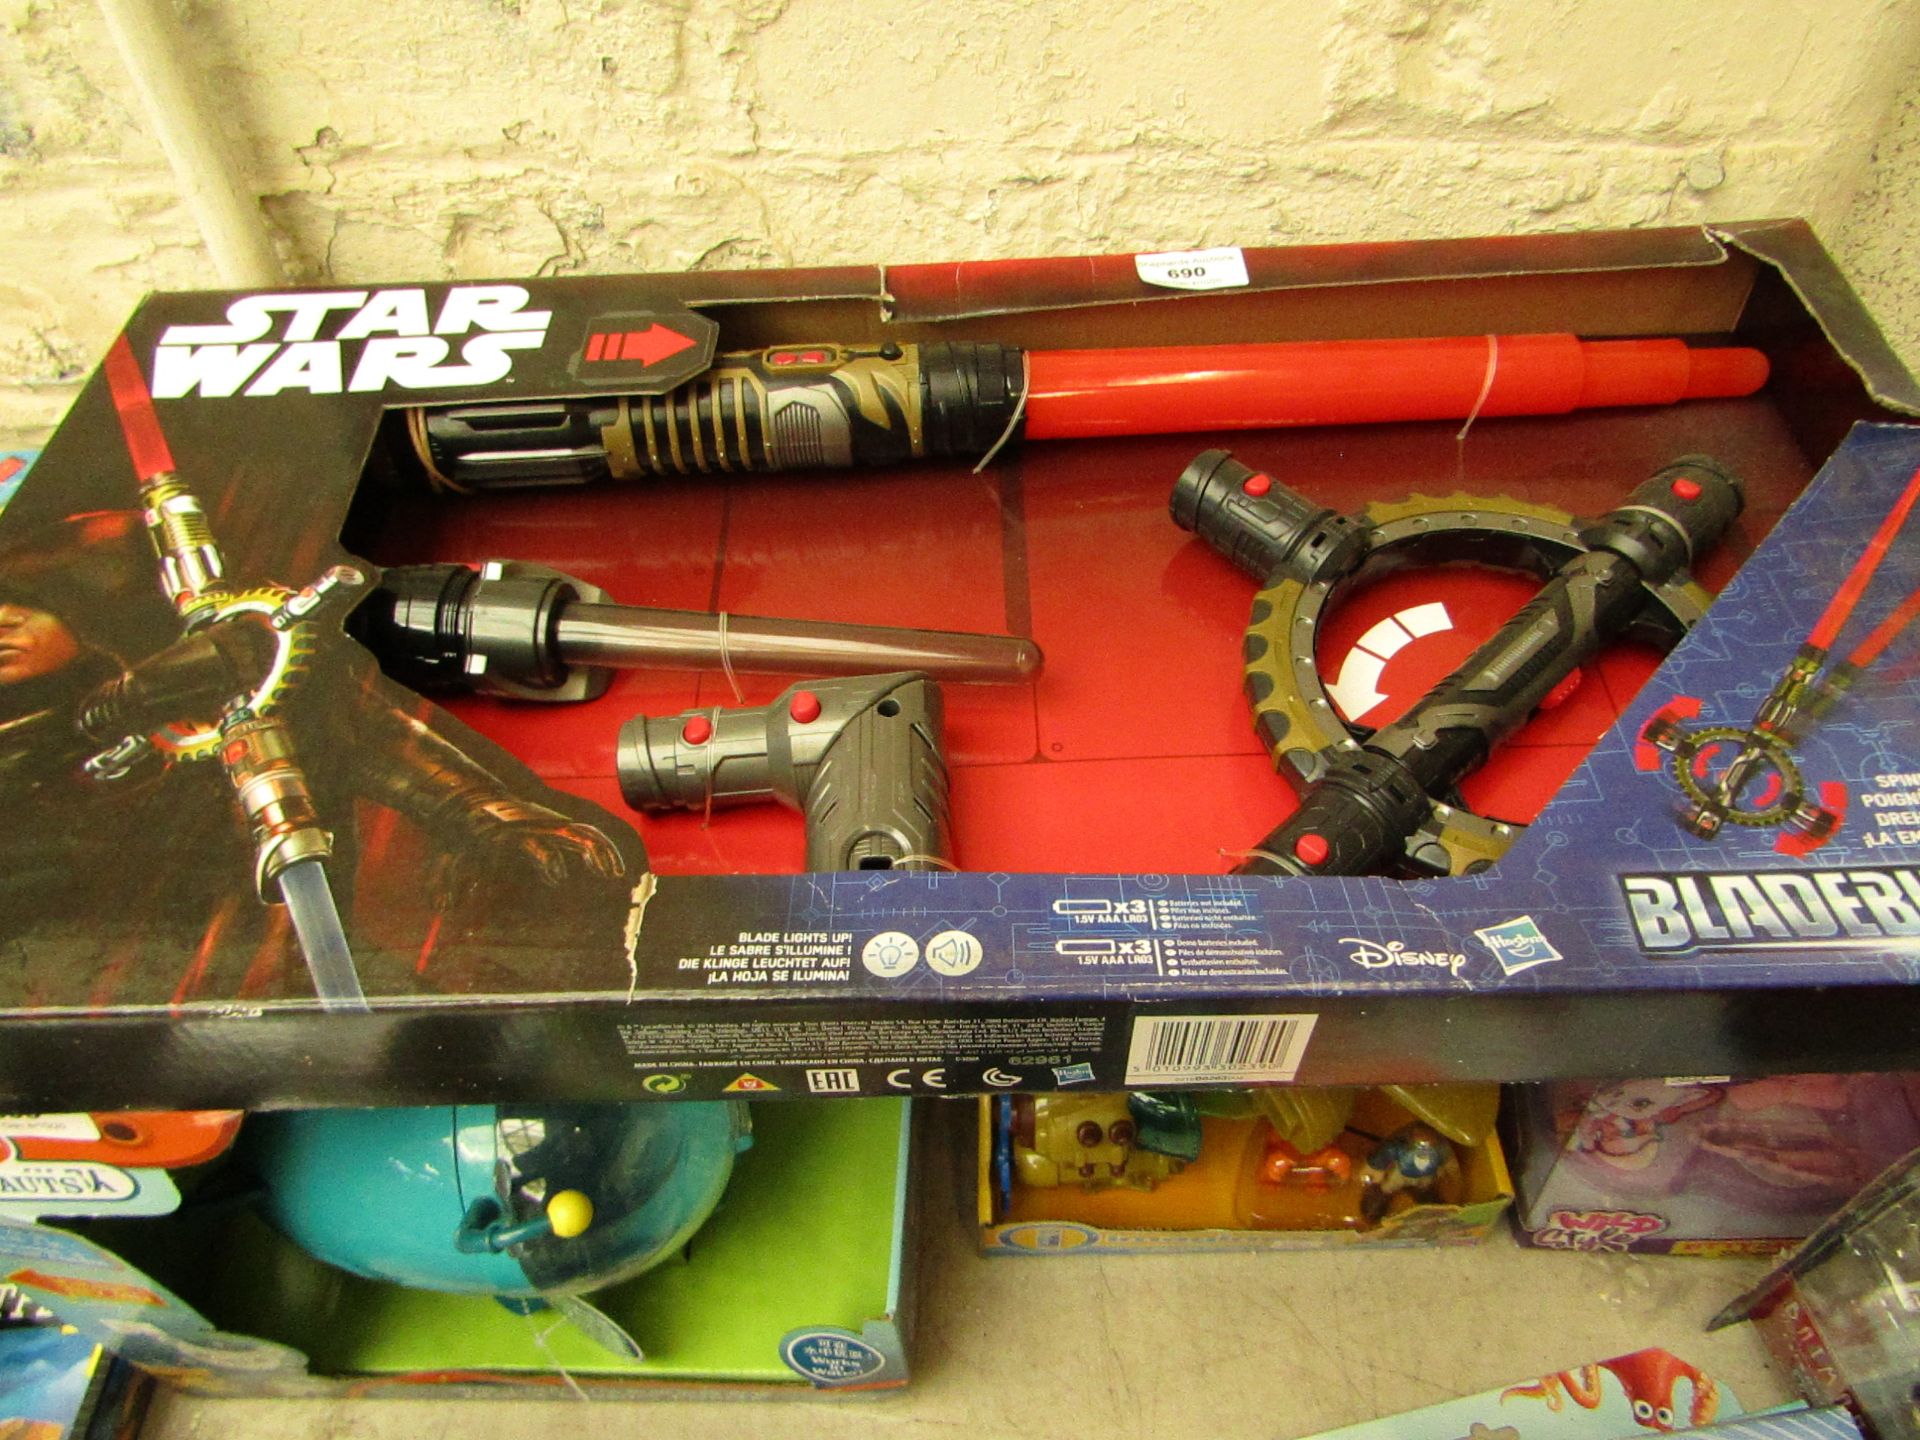 Star wars Blade Runners Spin Action Light Sabre set, unchecked and Boxed